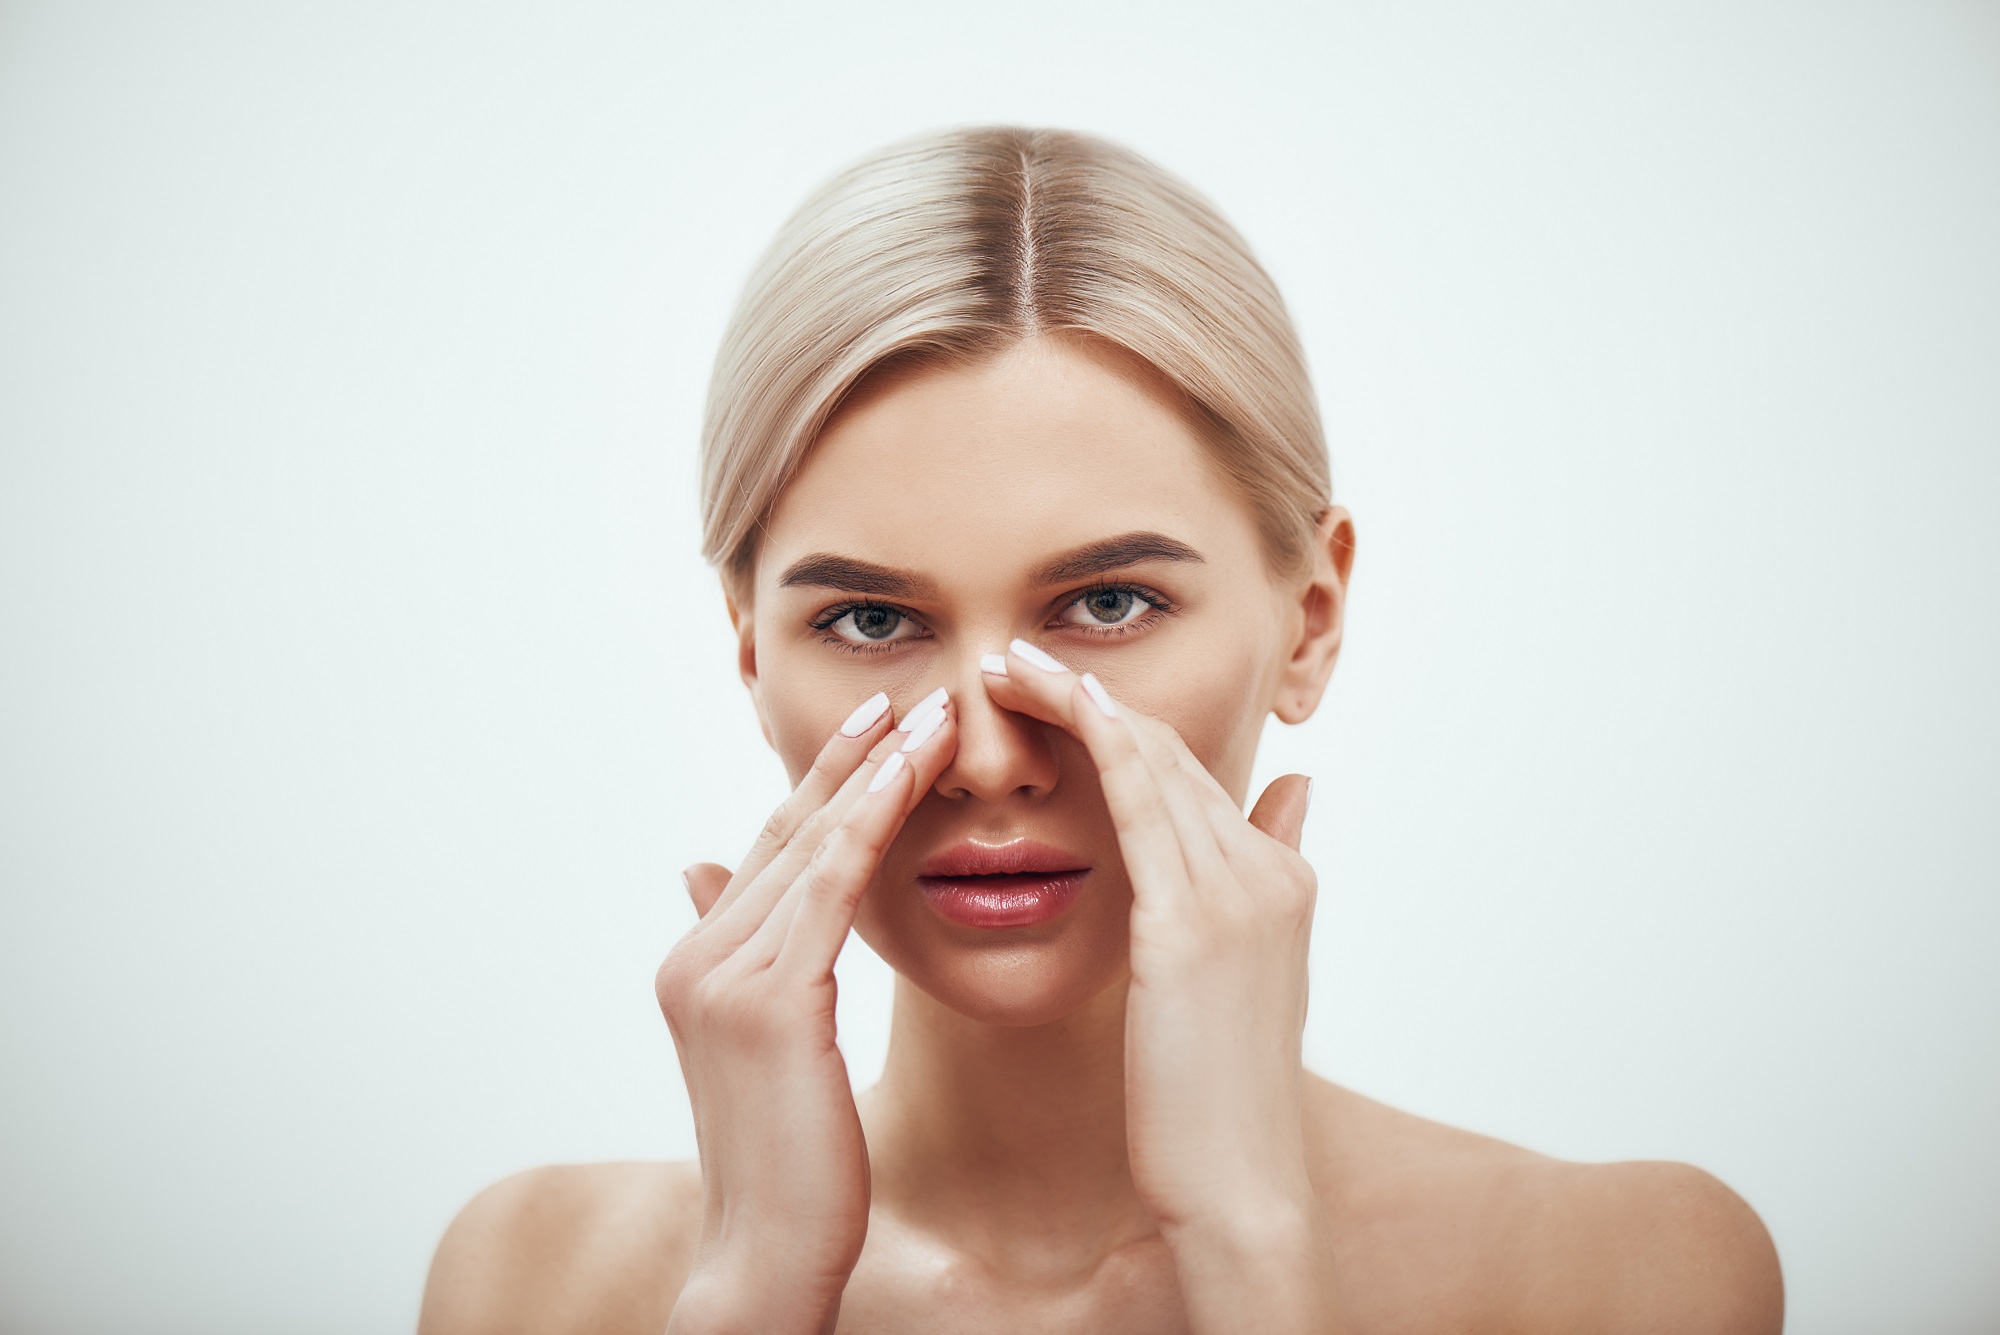 Specialist Dr. Steven Brodsky who treats BDD explains sufferers compulsively check a body part, often a facial feature, ask for reassurance, conceal it, and seek out multiple cosmetic plastic surgeries.